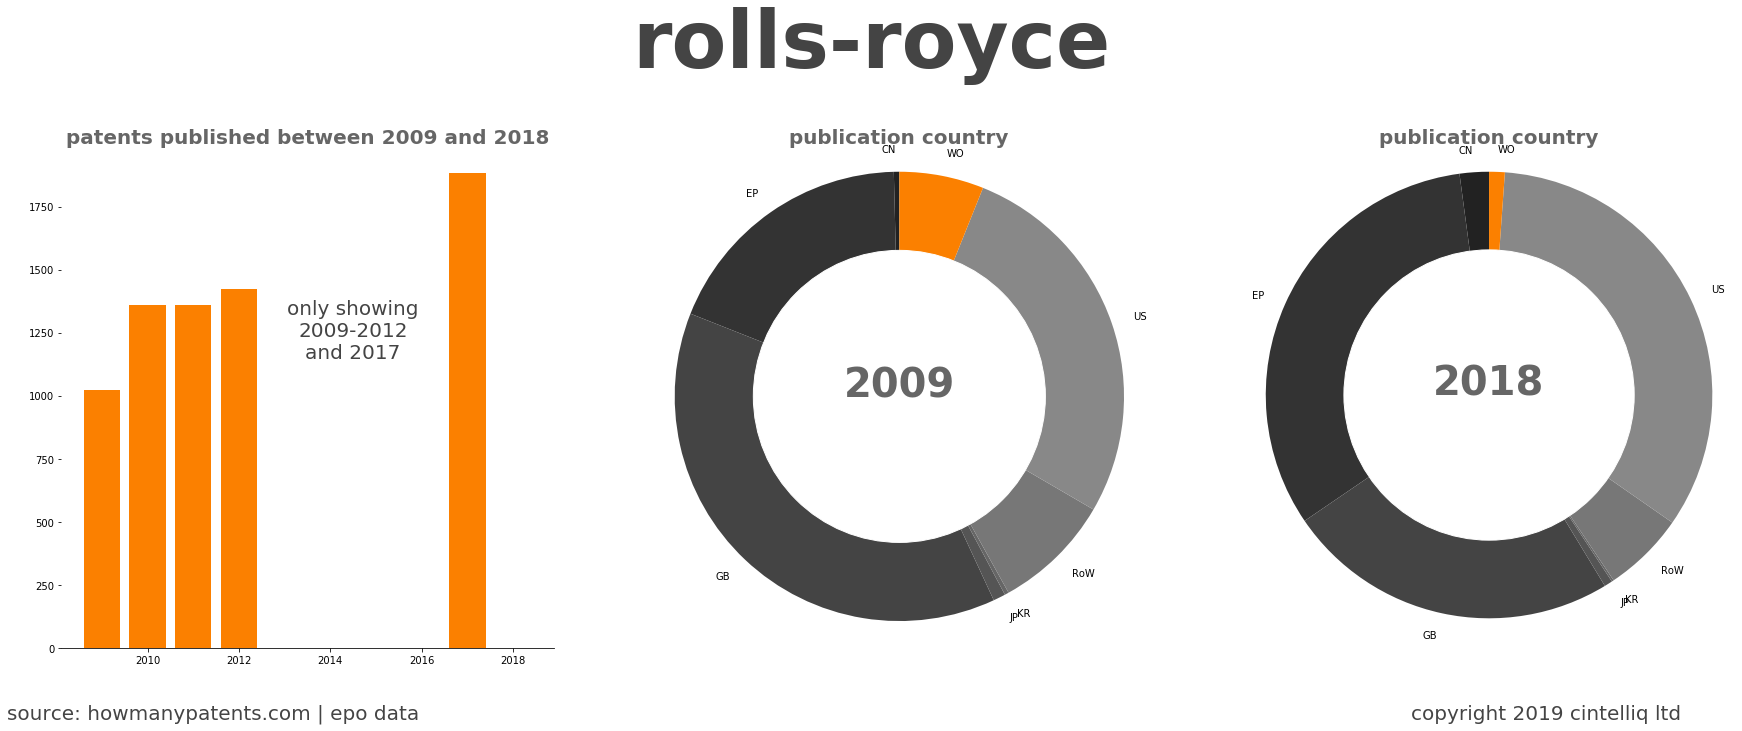 summary of patents for Rolls-Royce